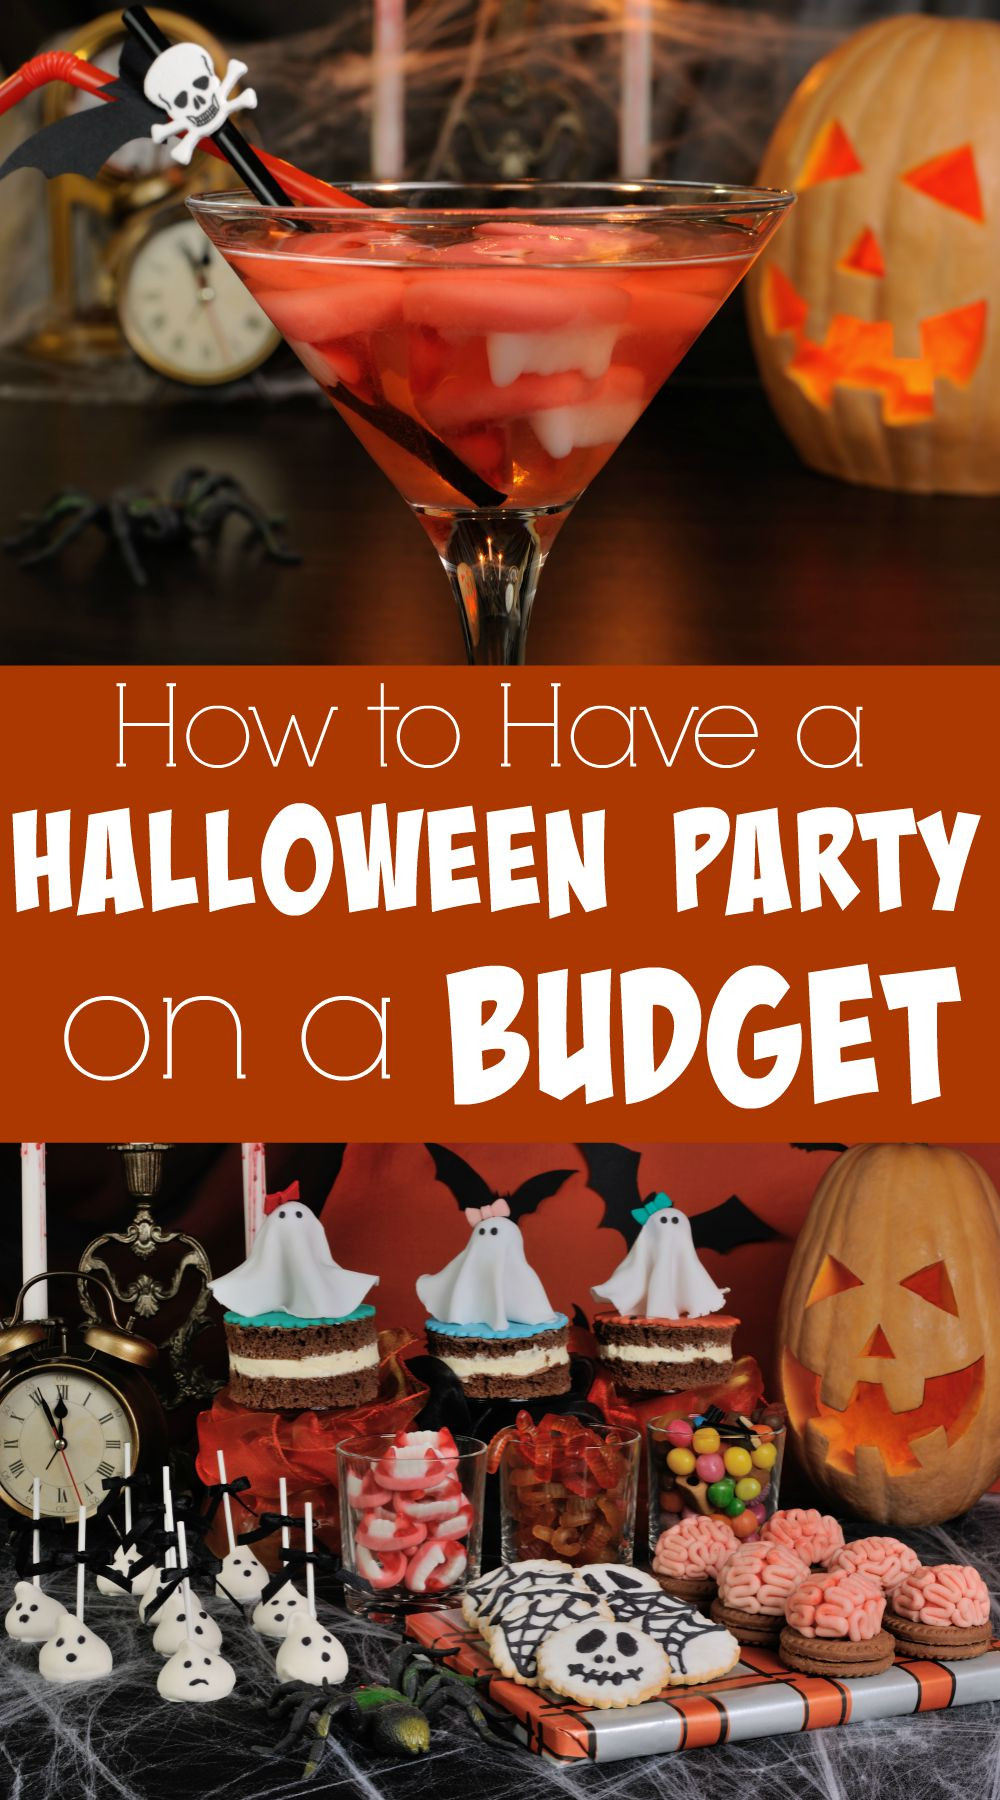 Halloween Ideas For Party
 Halloween Party on a Bud